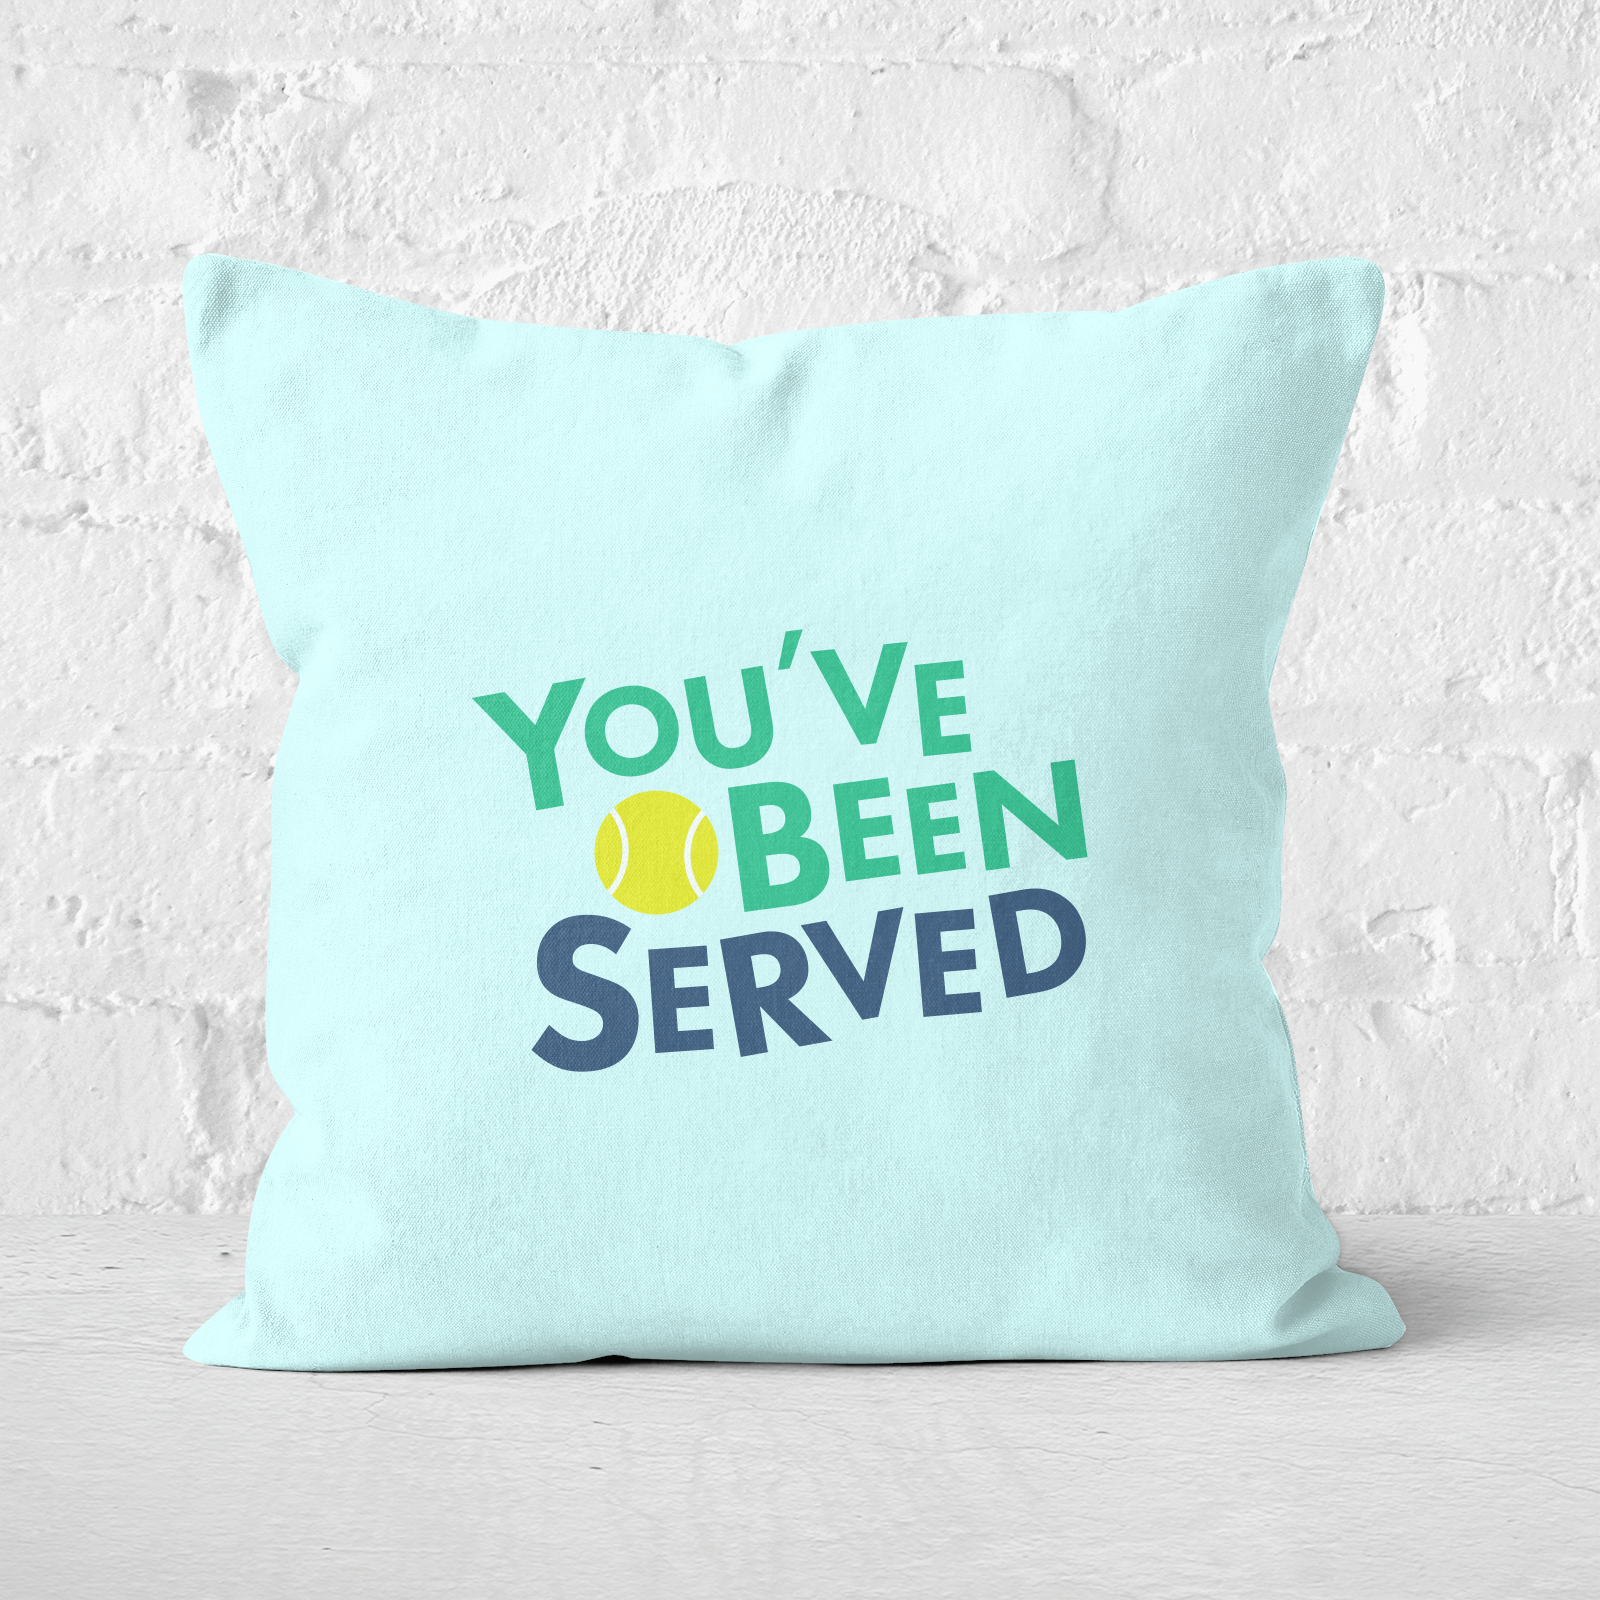 Youve Been Served Square Cushion   60x60cm   Soft Touch